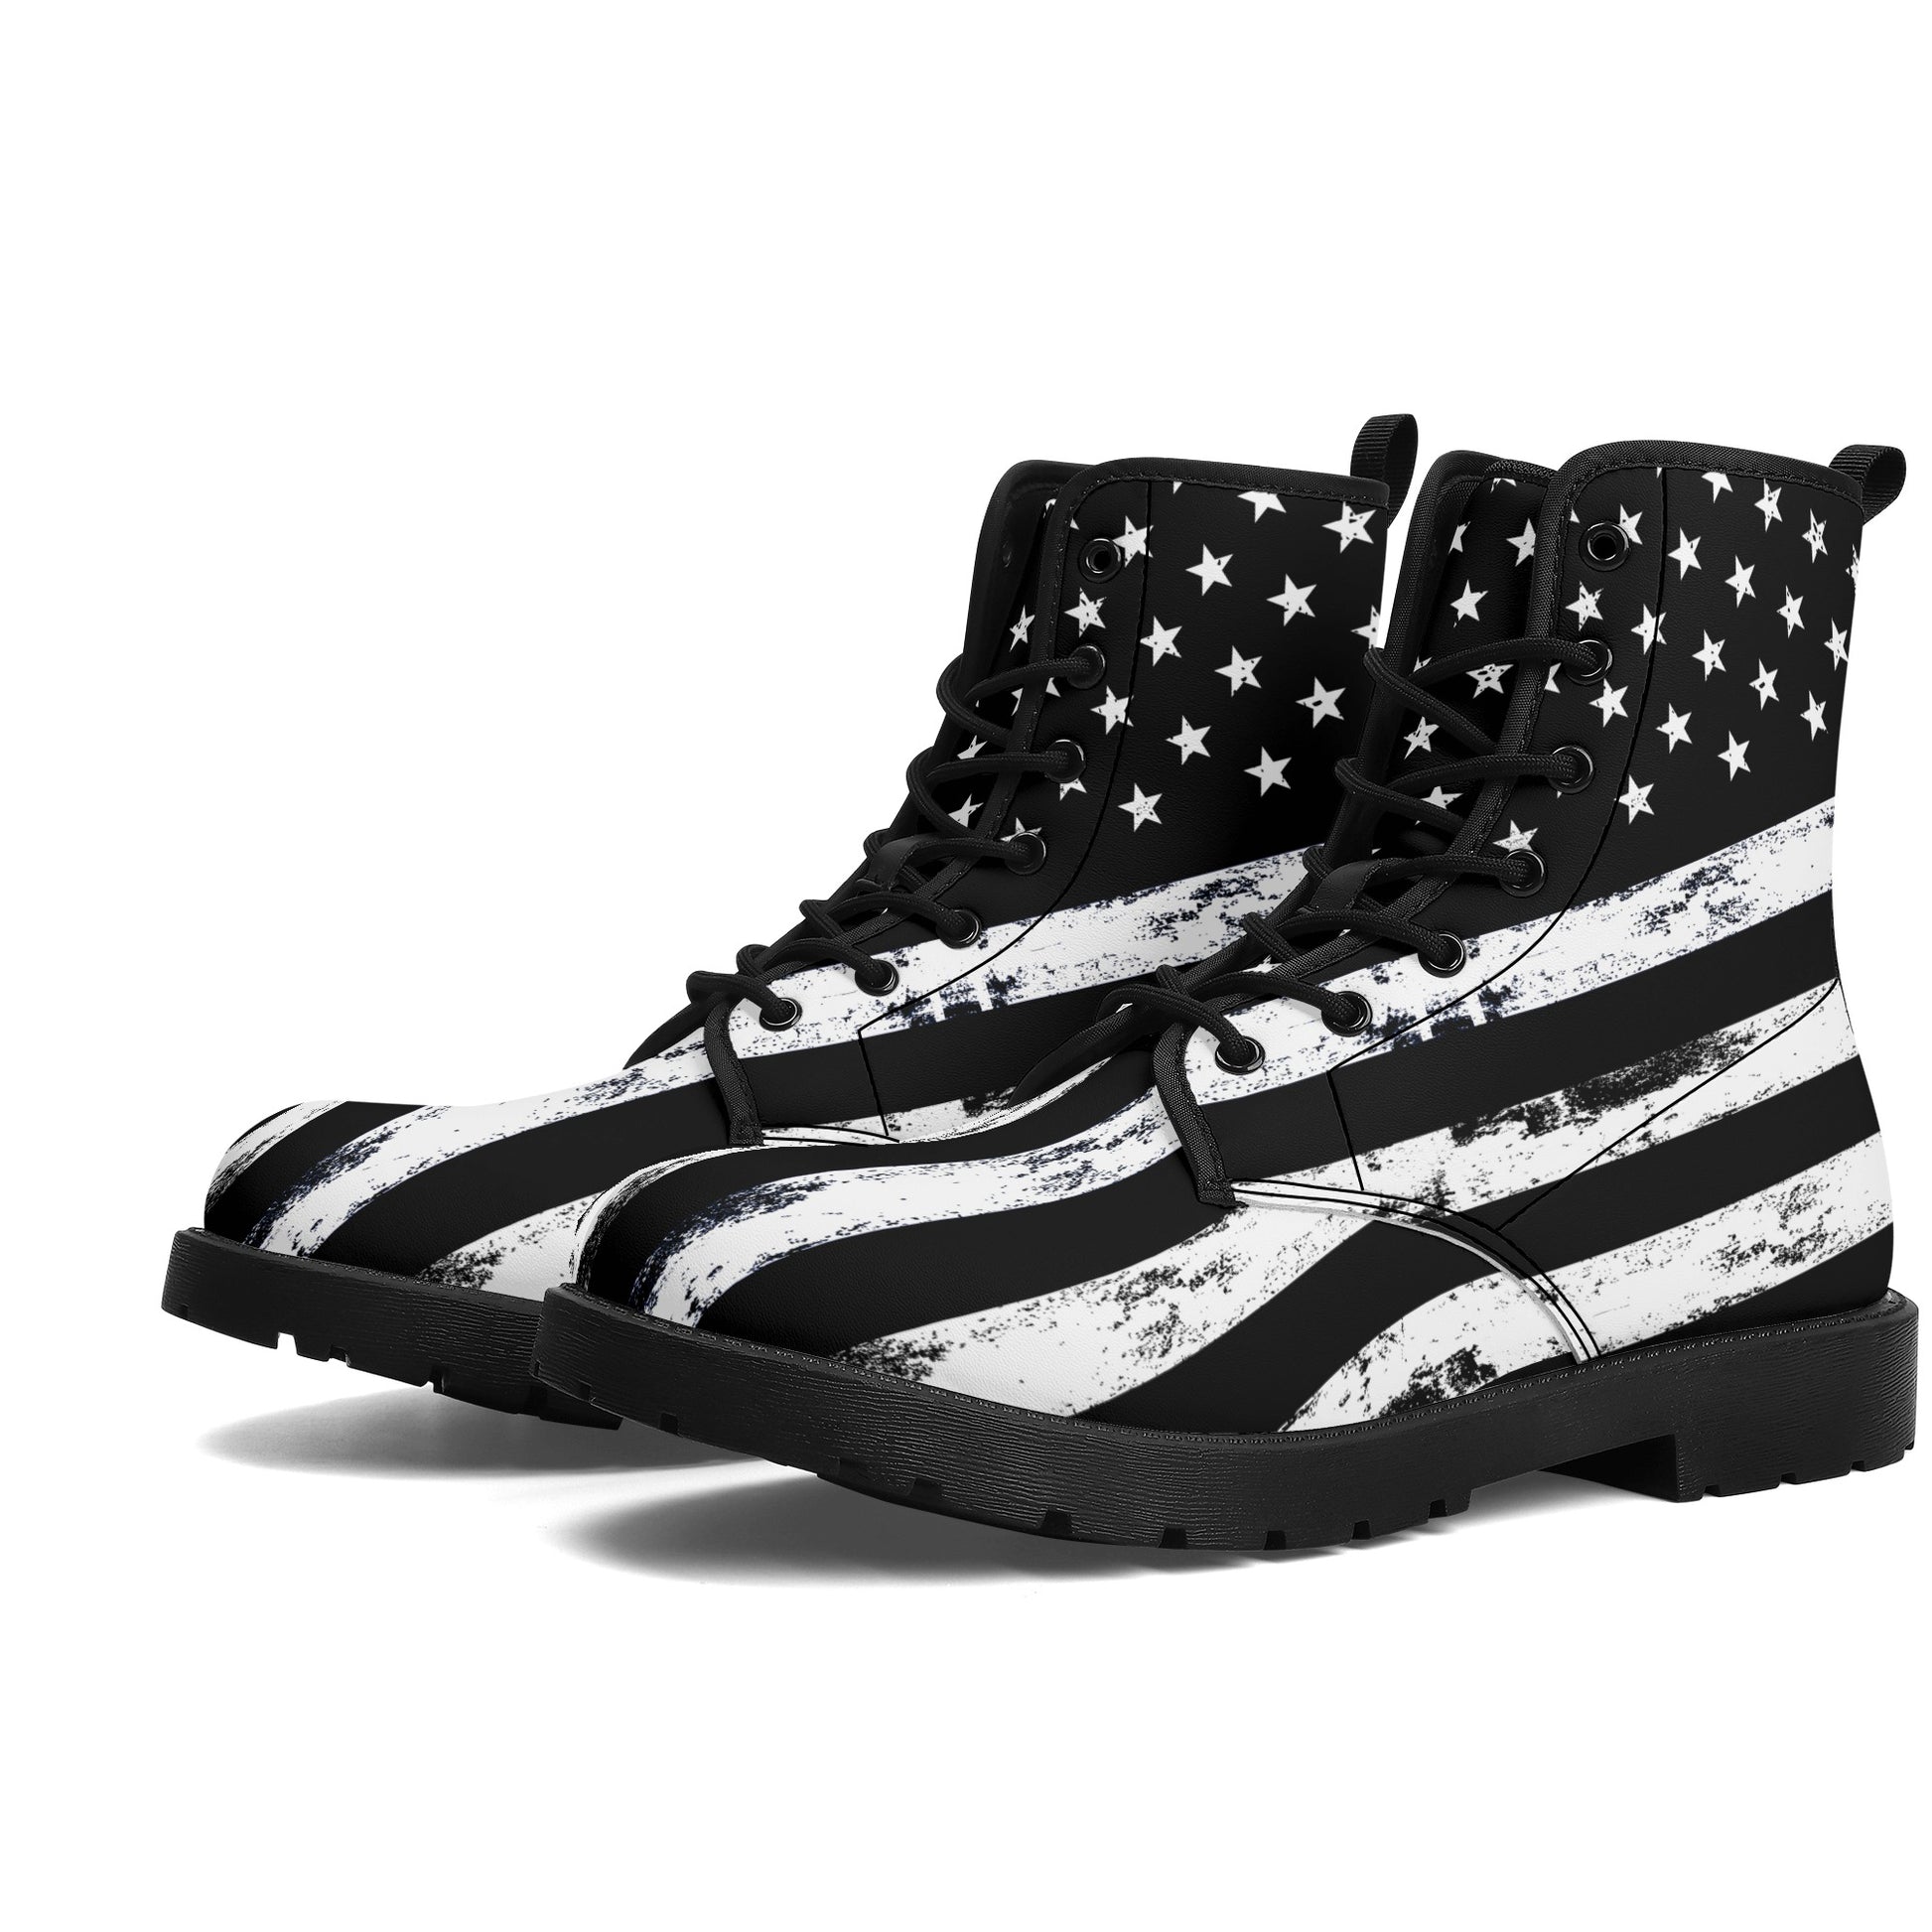 Black American Flag Men Leather Boots, Distressed Stars Stripes USA Patriotic Lace Up Shoes Festival Ankle Combat Work Hiking Gift Starcove Fashion